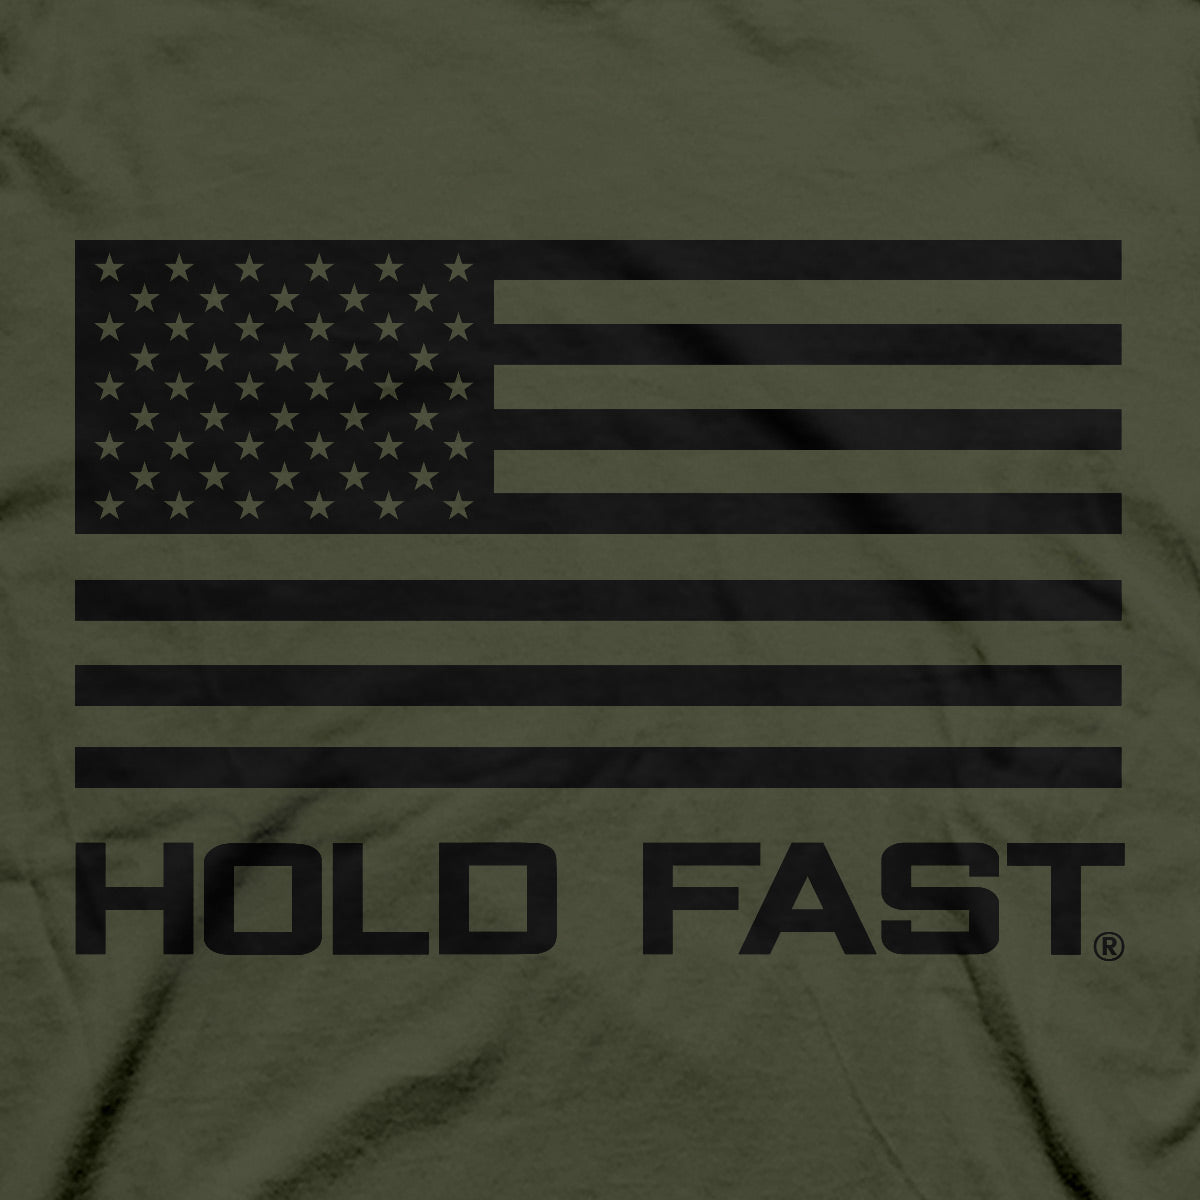 HOLD FAST Mens T-Shirt Fight The Good Fight | 2FruitBearers